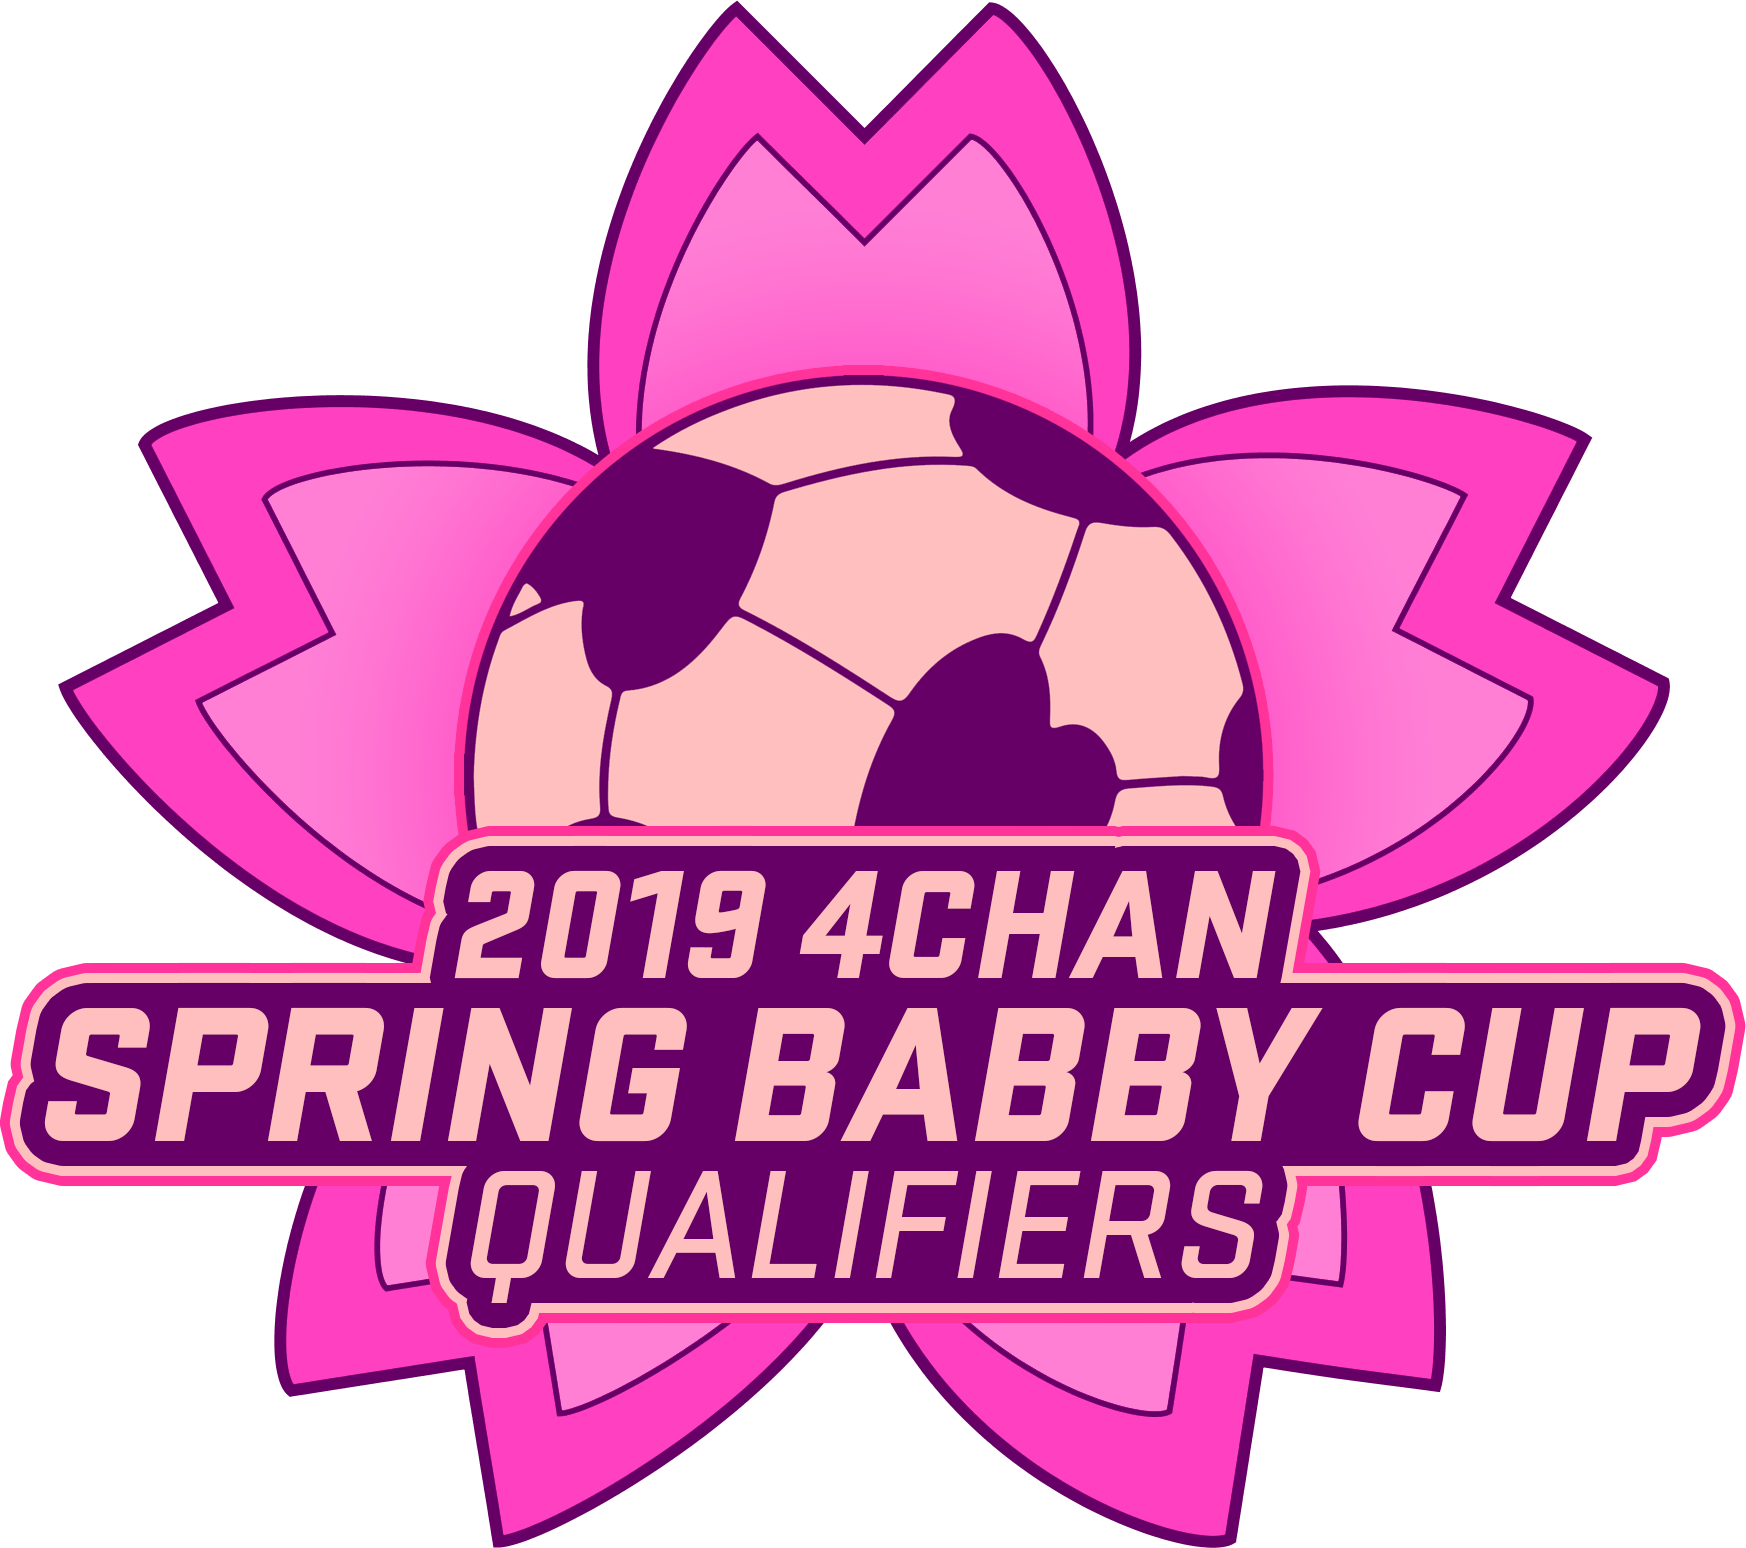 2019 4chan Spring Babby Cup Qualifiers